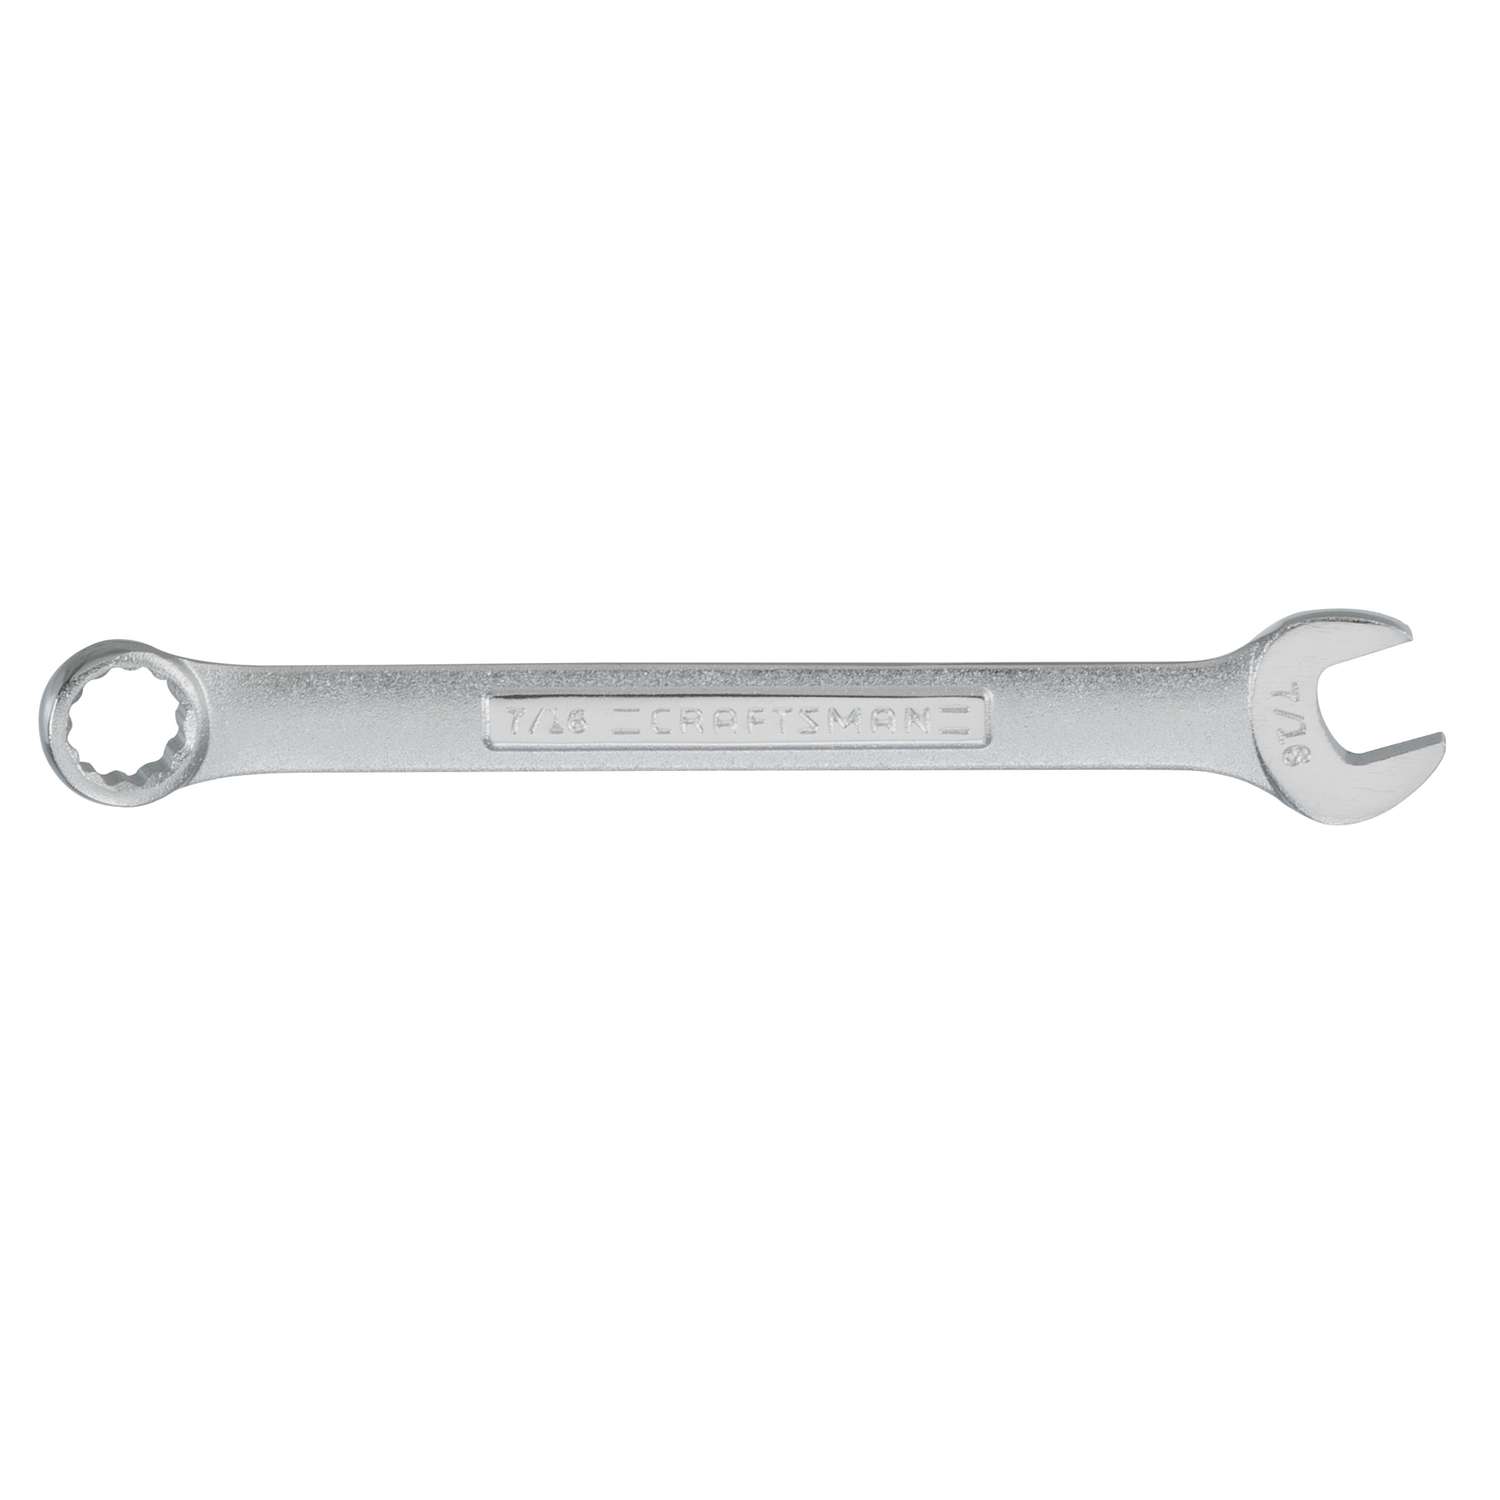 Craftsman 11/16 Inch 12 Point Combination Wrench 9-44698 